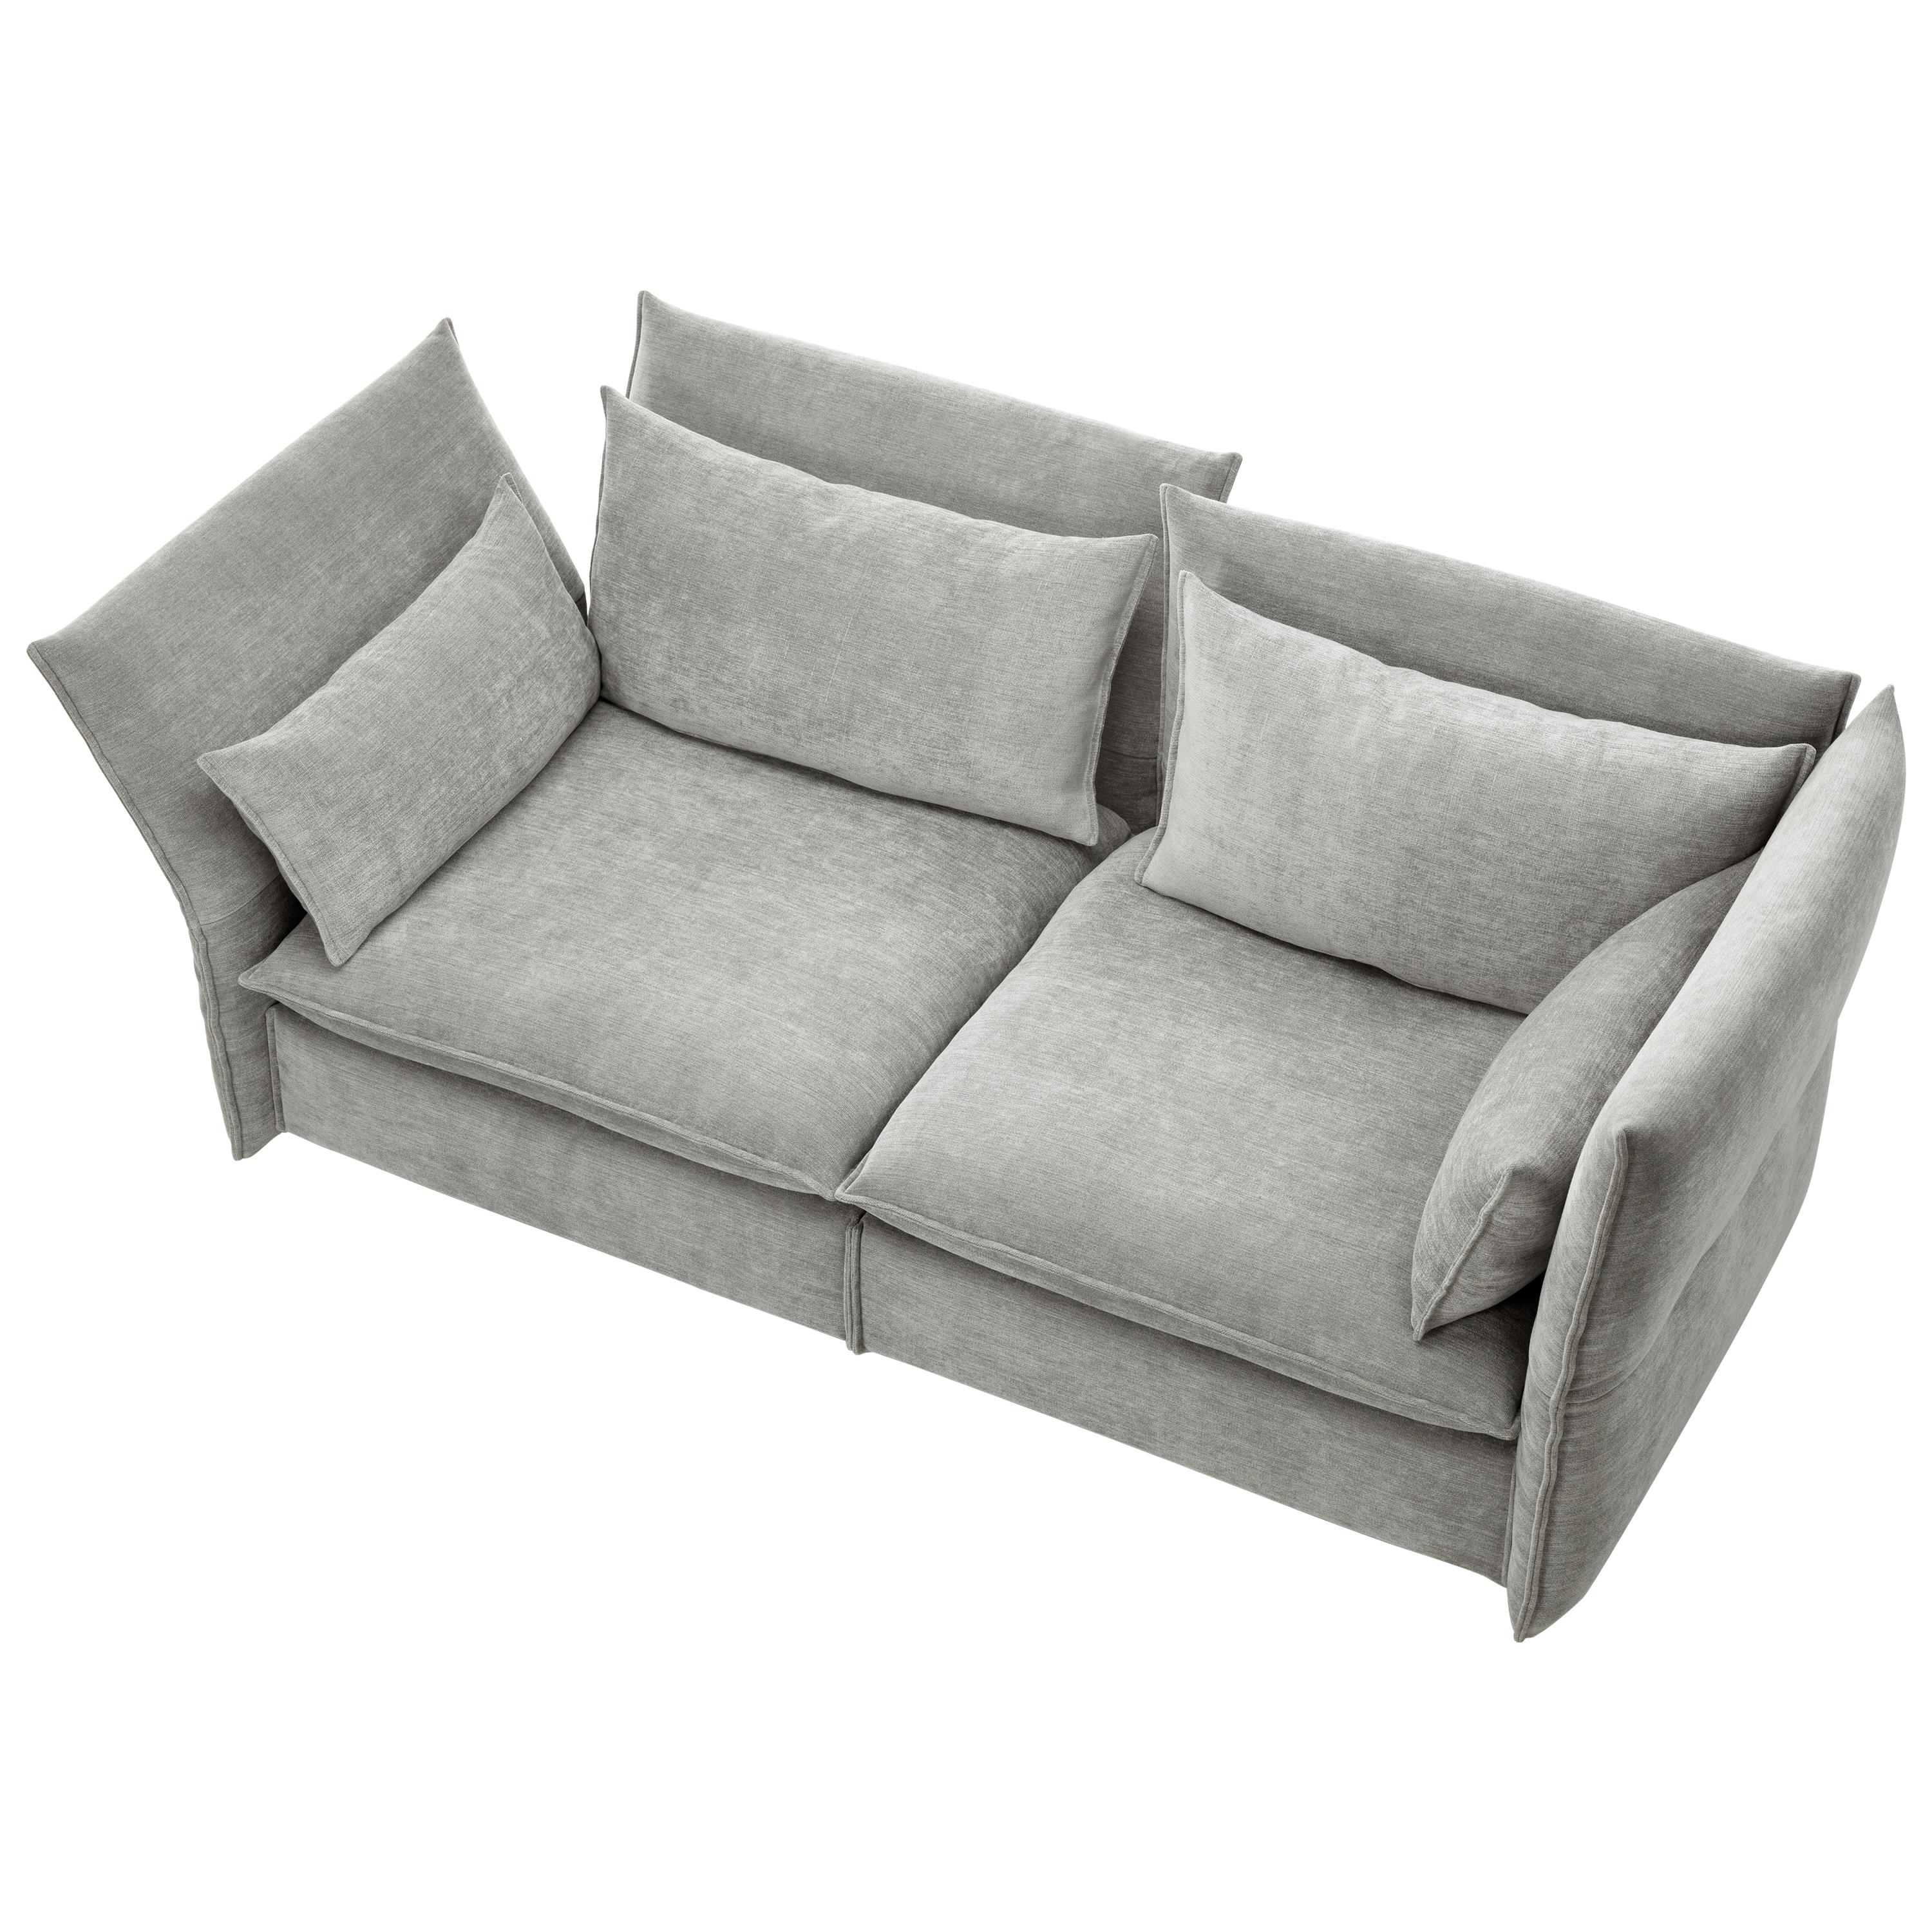 Vitra Mariposa 2 1/2-Seat Sofa in Silver Grey by Edward Barber & Jay Osgerby For Sale